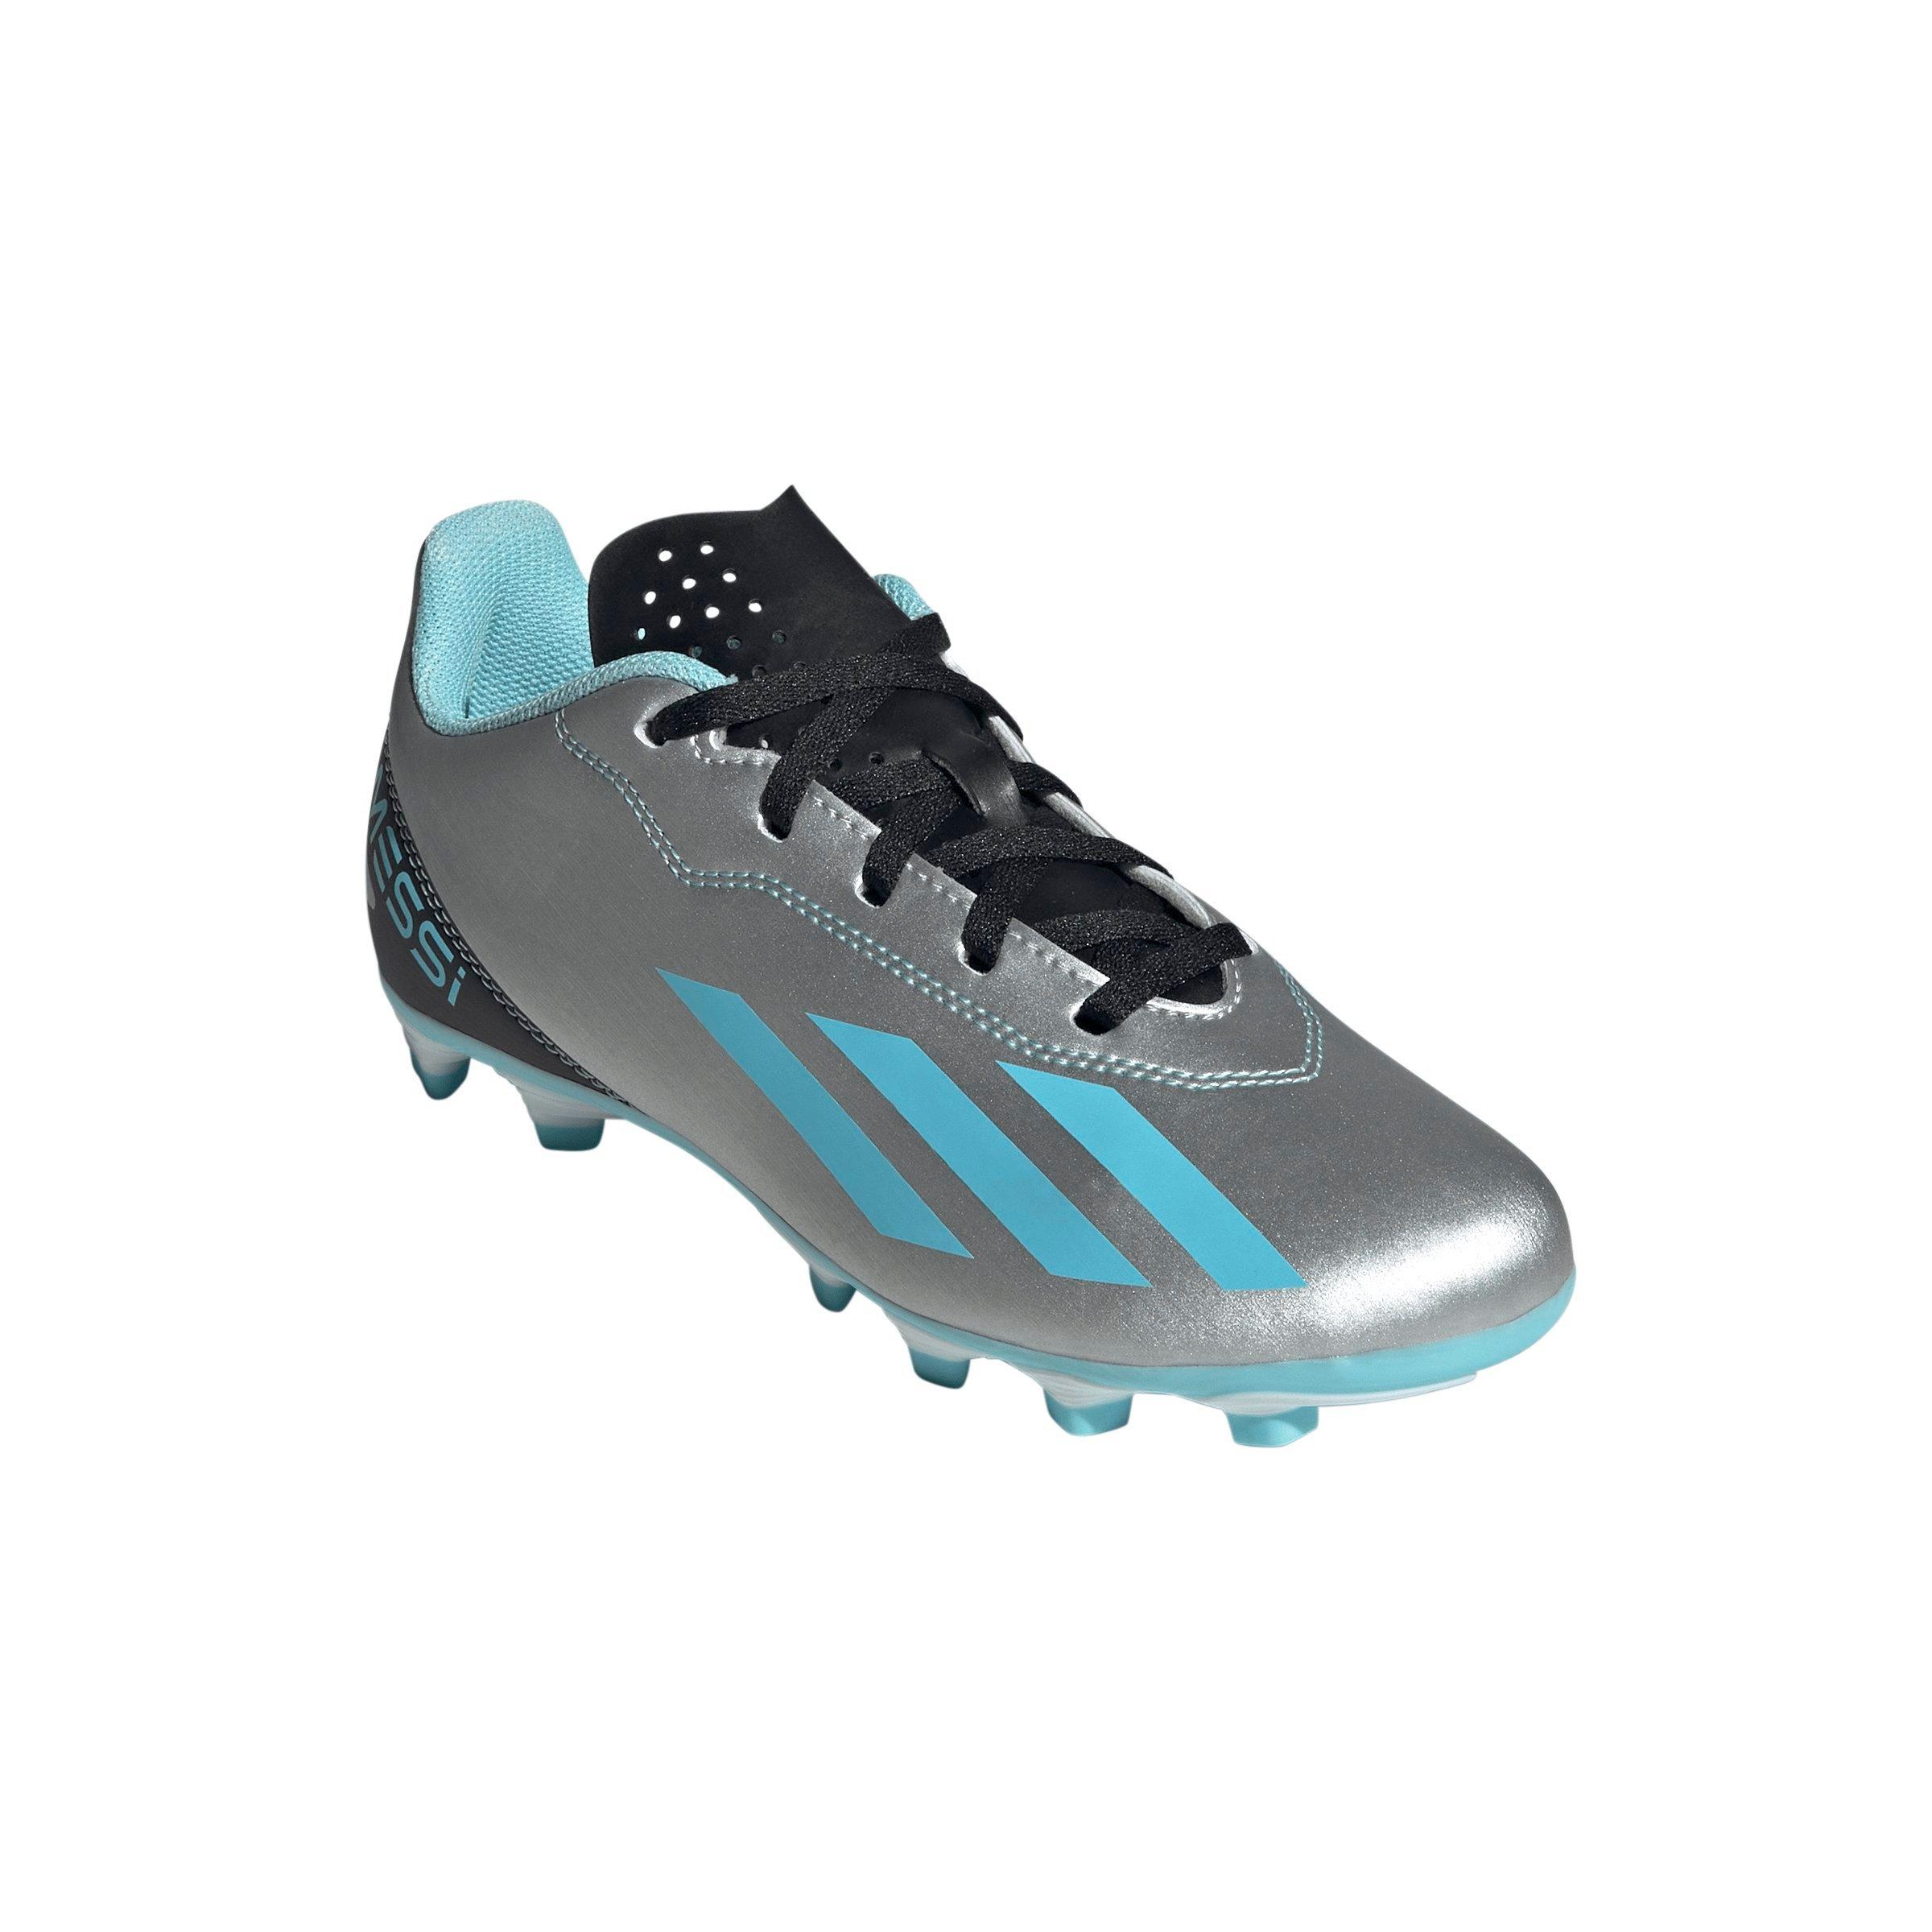 Lionel Messi Crocs Shoes, Argentina World Cup Football Soccer Gifts -  Discover Comfort And Style Clog Shoes With Funny Crocs